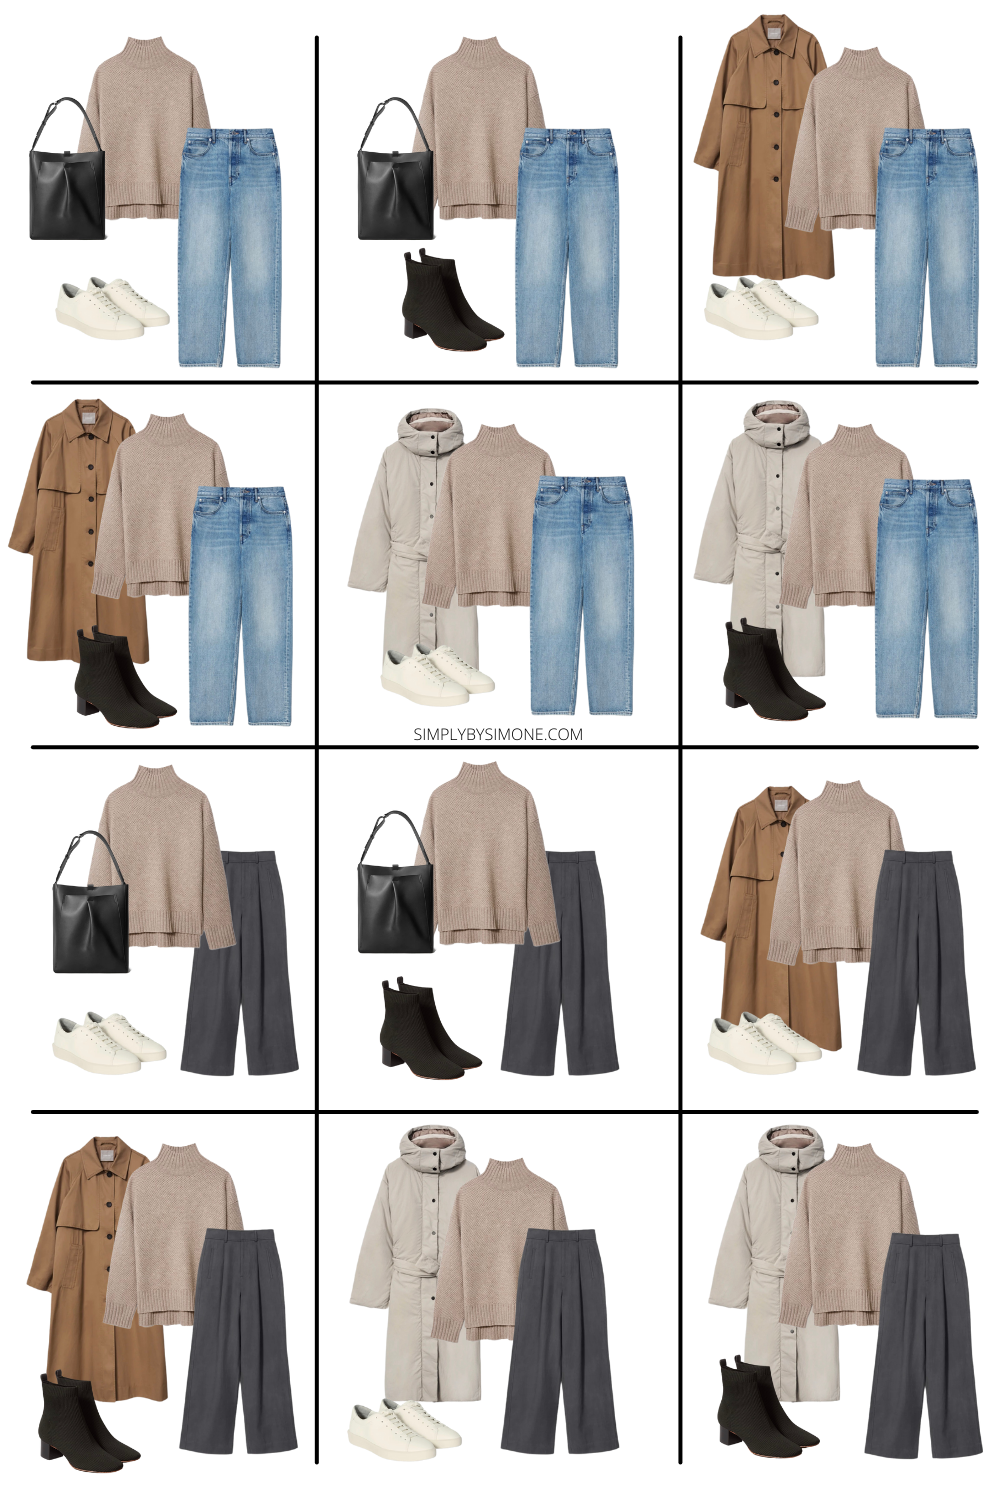 https://simplybysimone.com/wp-content/uploads/2022/01/Everlane-Winter-Capsule-Wardrobe-What-to-wear-this-Winter-2022-Looks-13-24.png